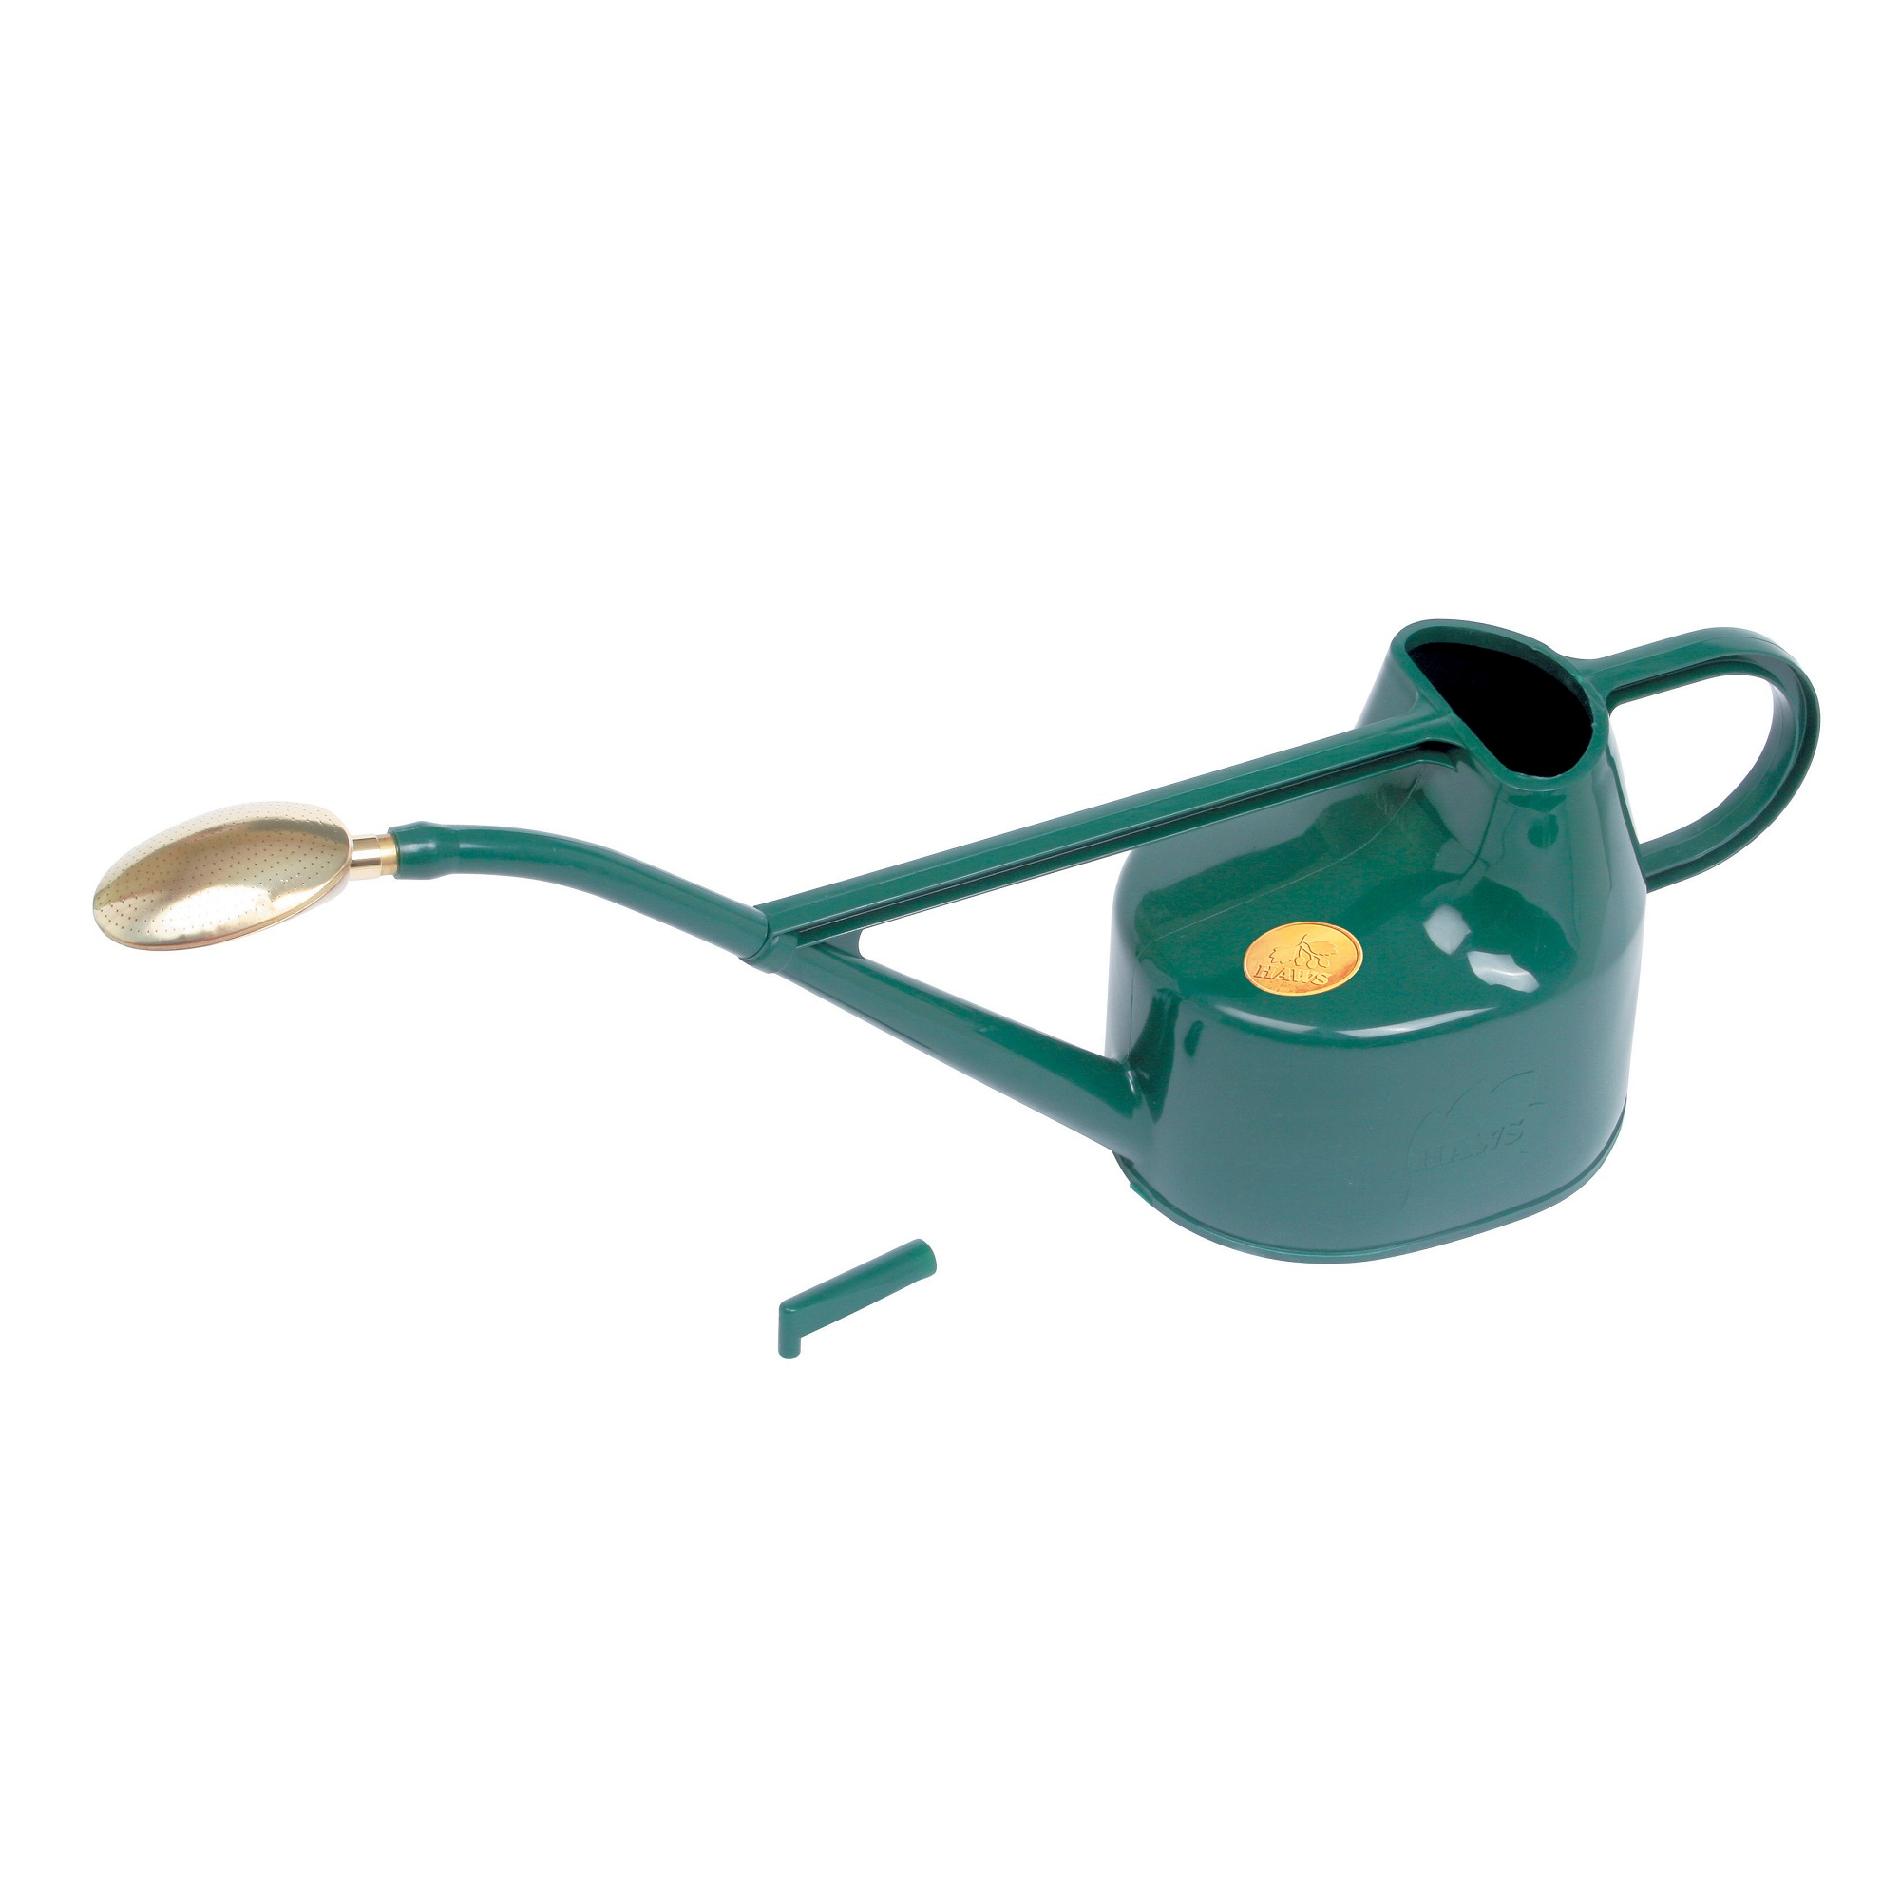 Deluxe 1.3 gallon Outdoor Green Plastic Watering Can